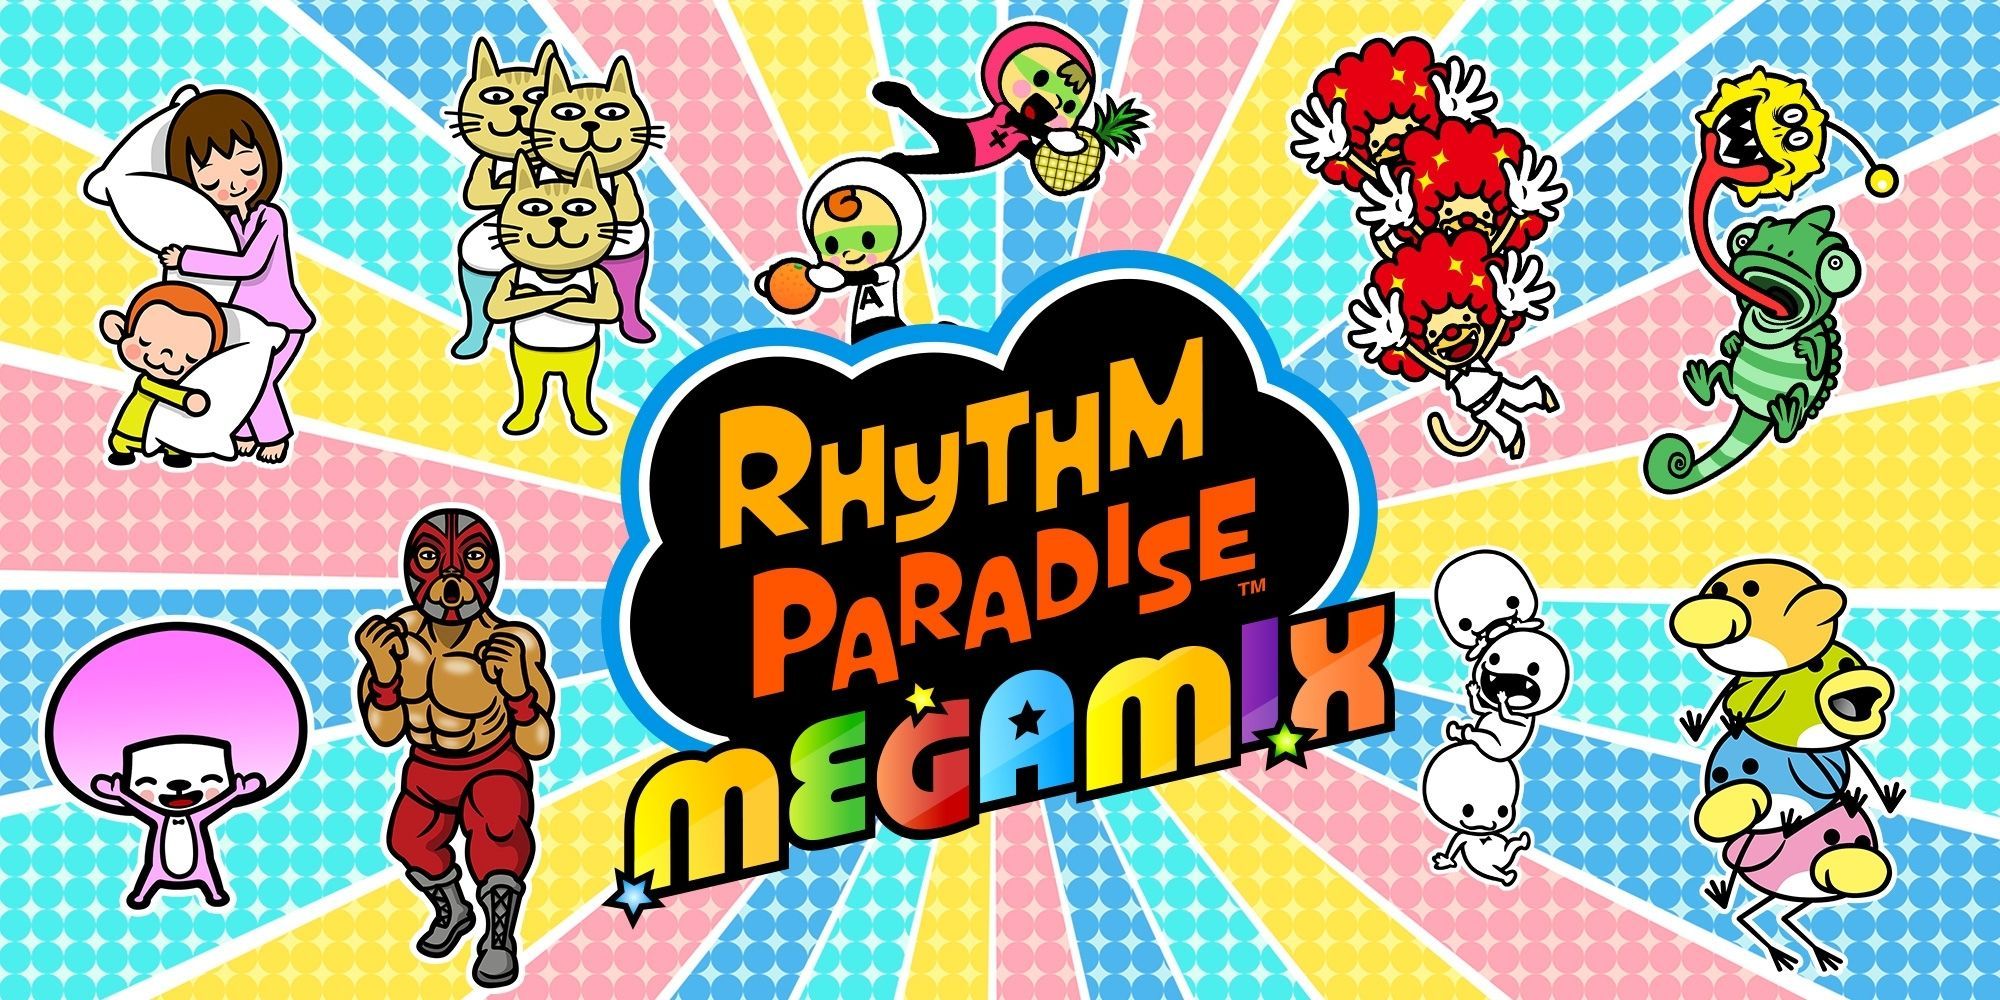 Rhythm Paradise Cast Pose In Front Of Colorful Background And Title